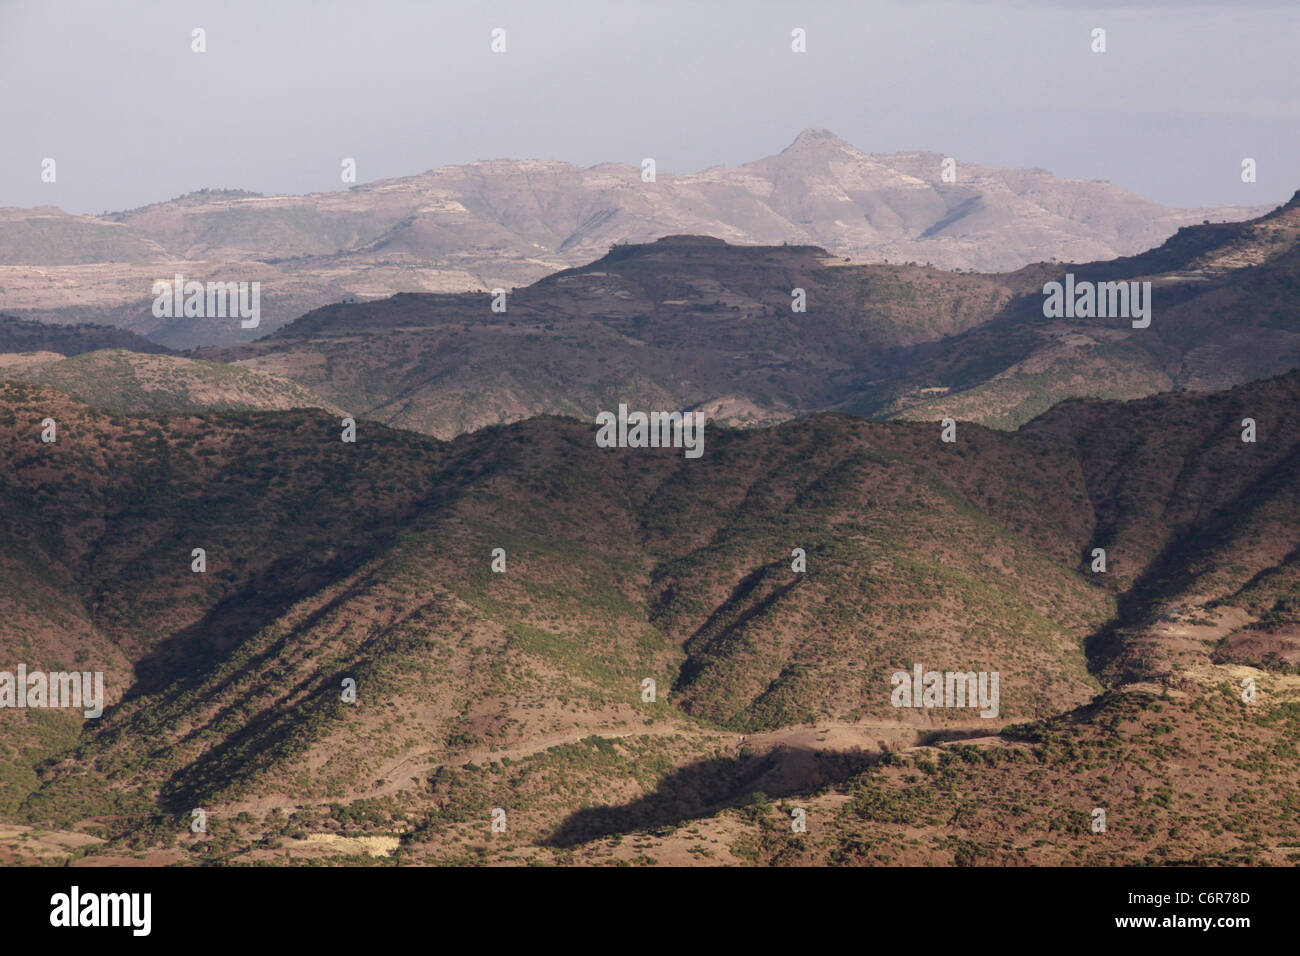 Lalibela landscape with a view over mountain ranges Stock Photo